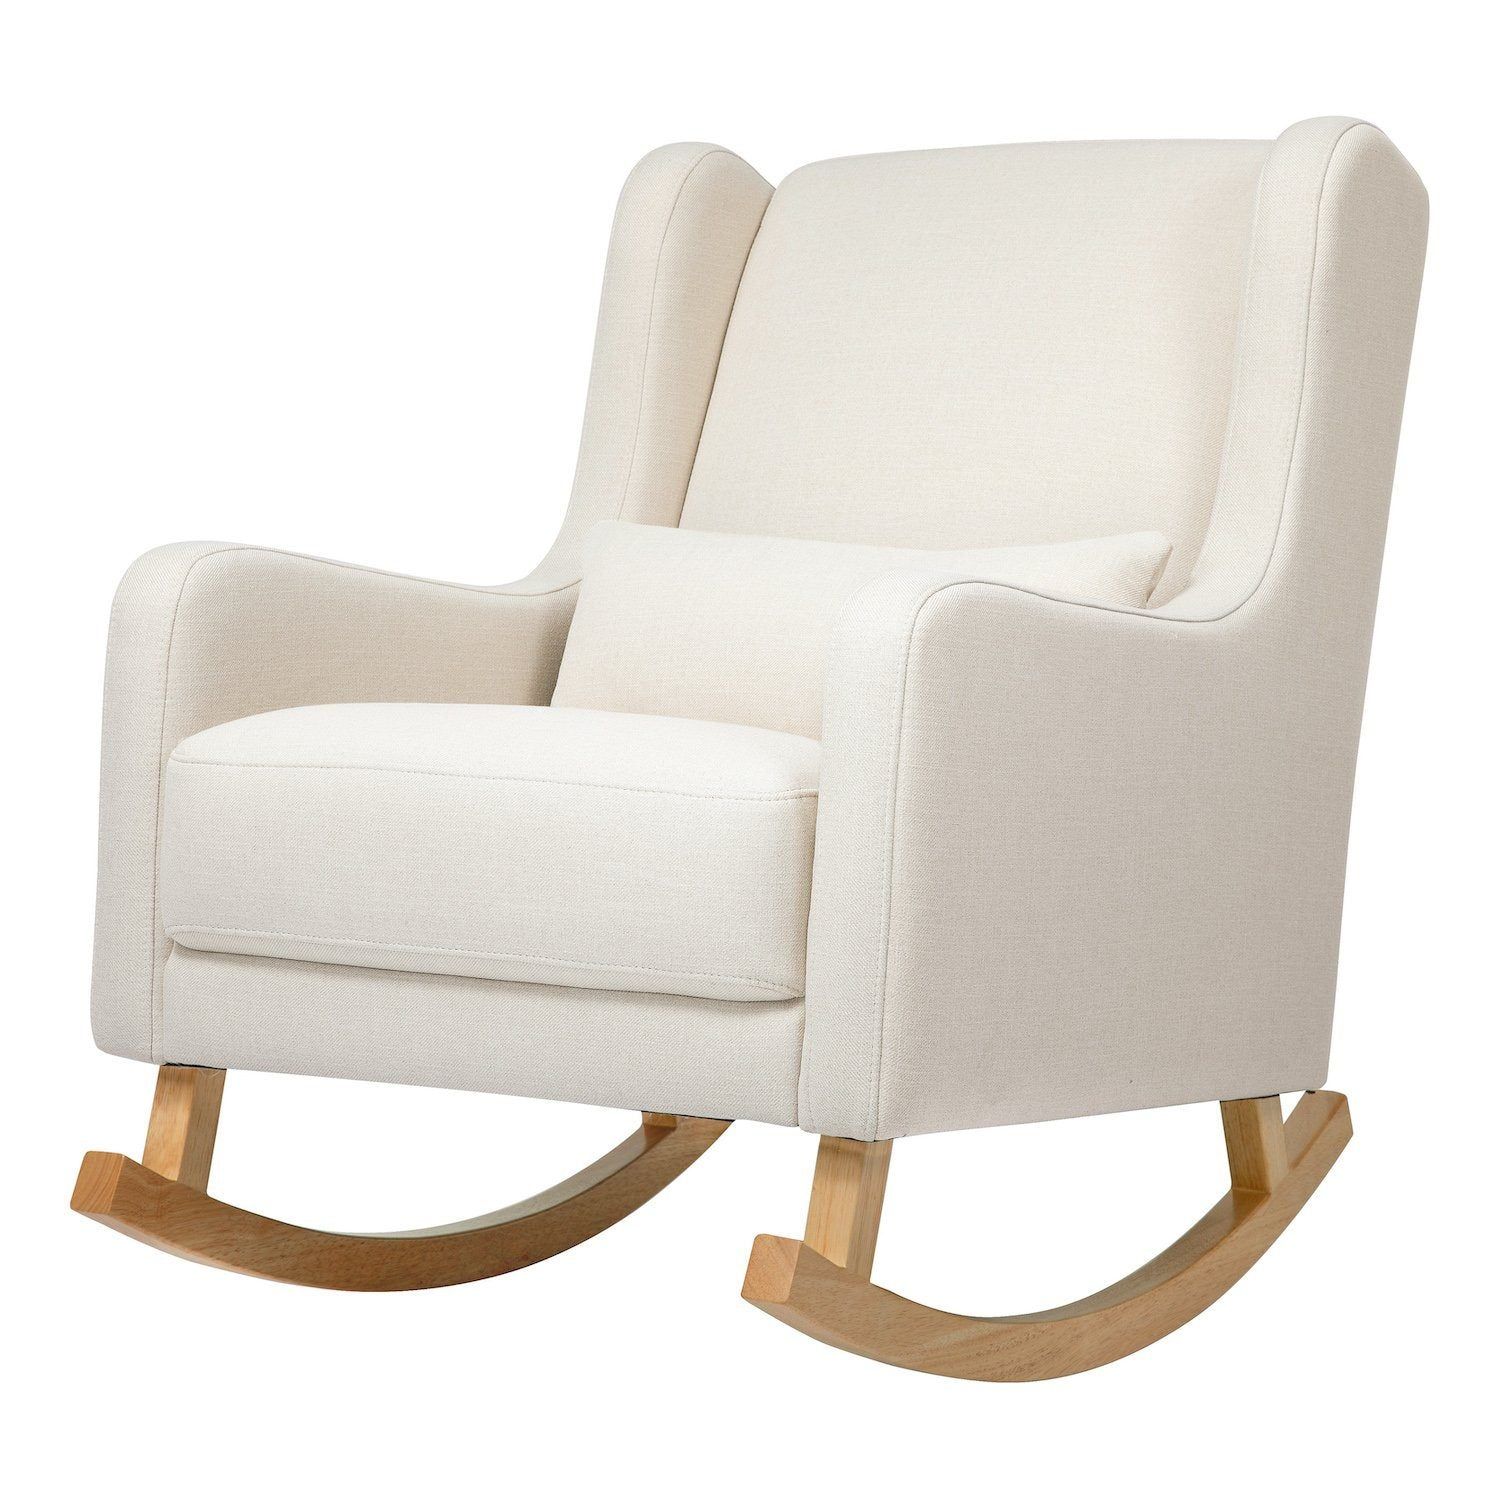 Kai Rocker in Eco-Performance Twill Fabric - Natural with Ash Legs | Project Nursery